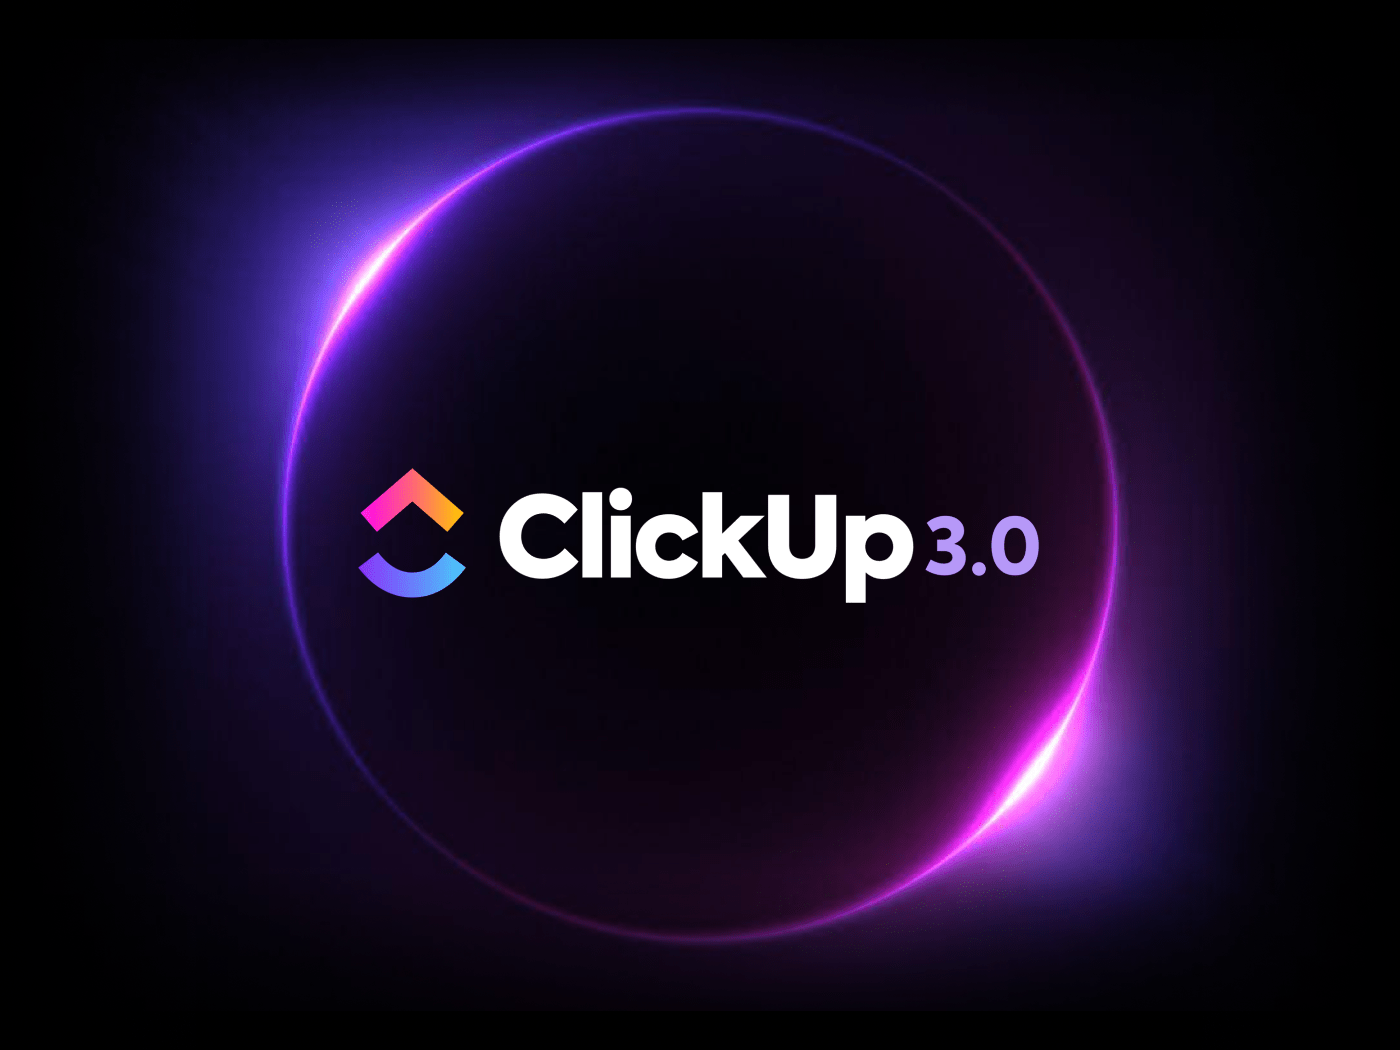 ClickUp 3.0 Blog Feature